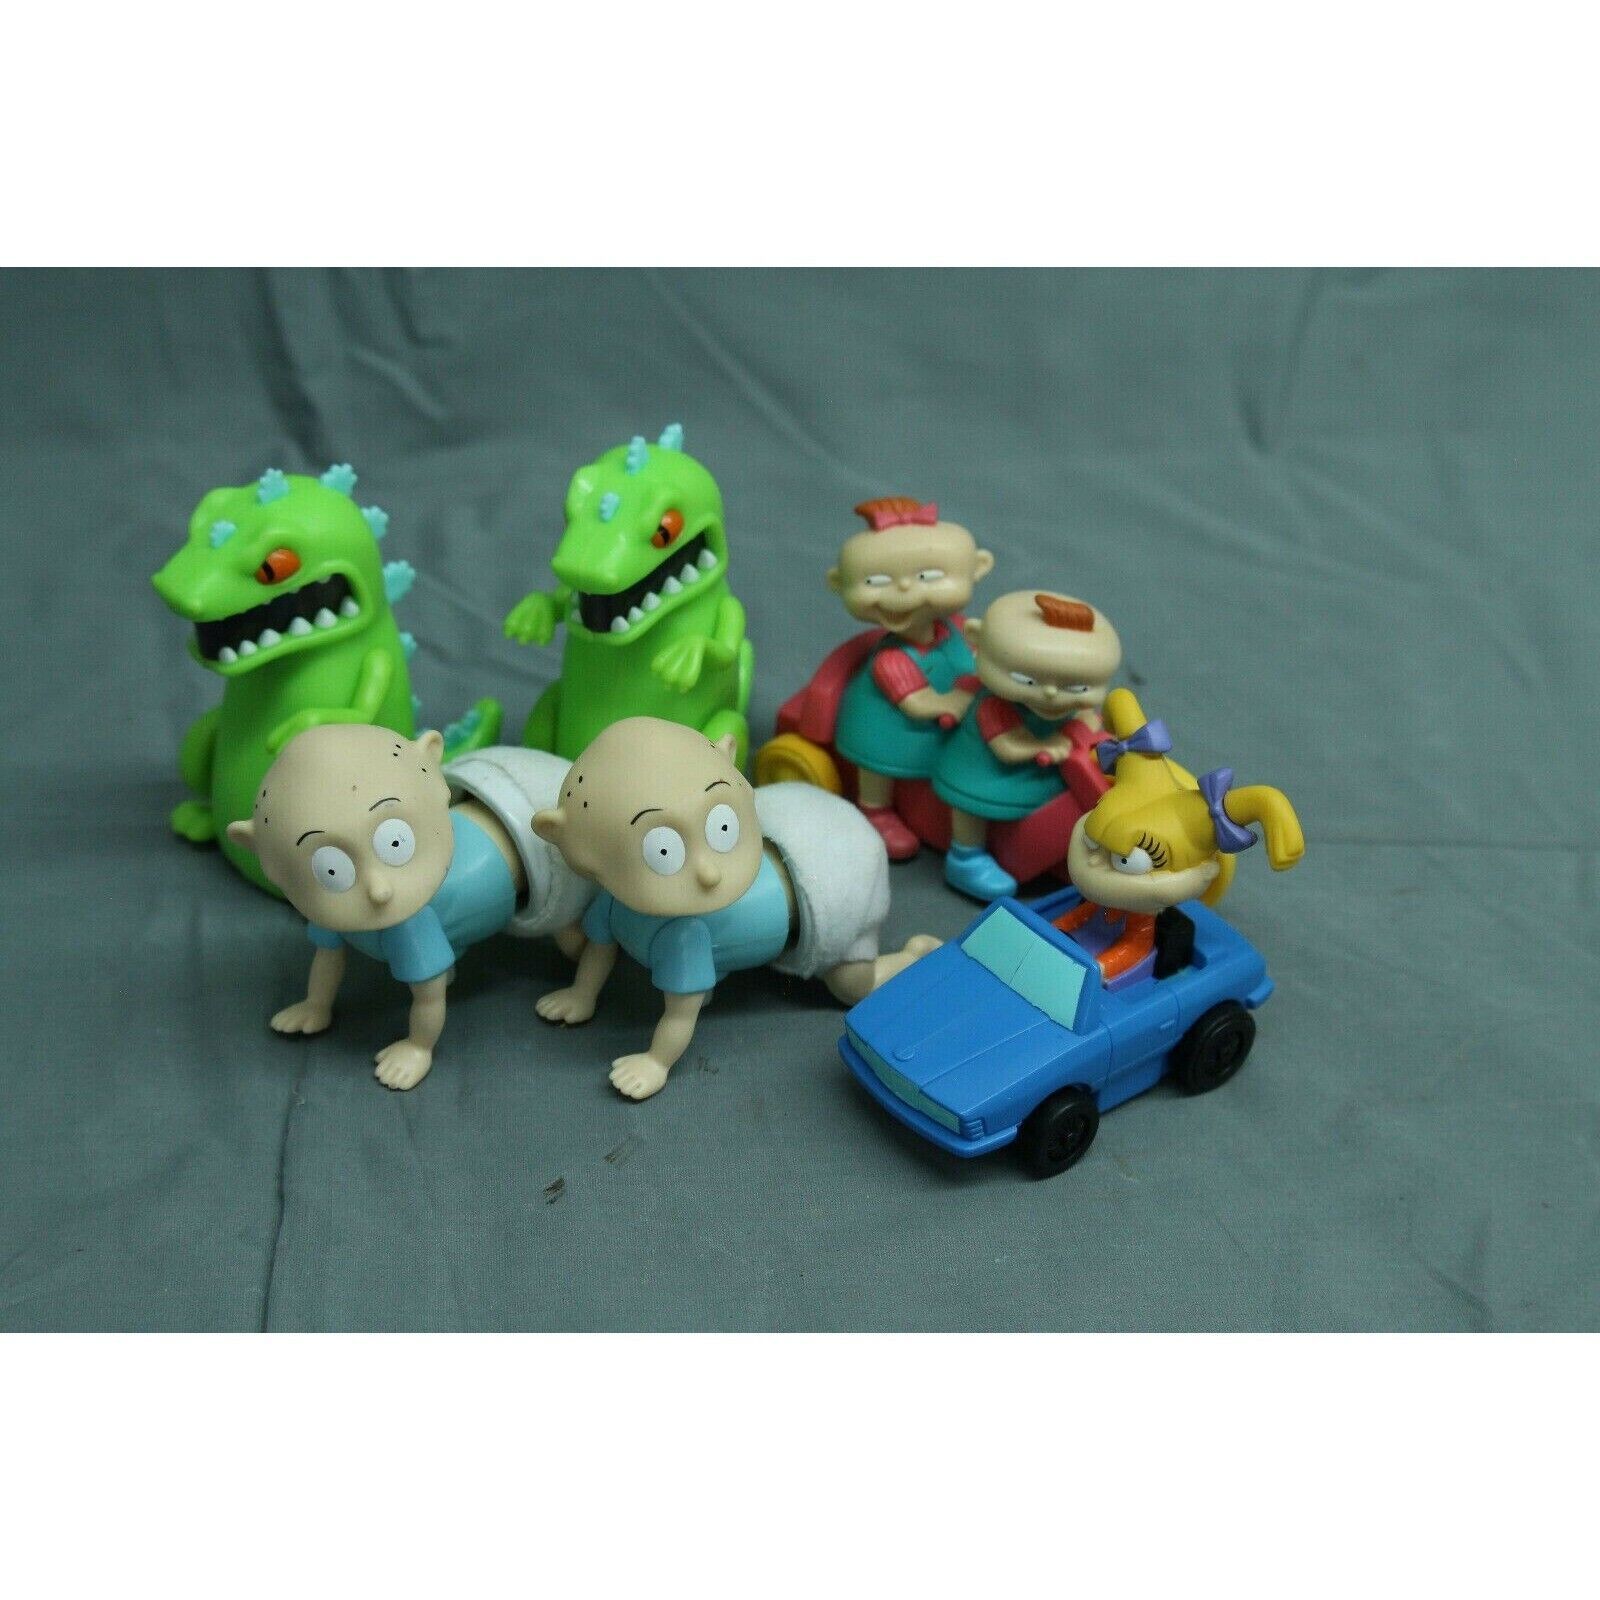 Lot of 6 Vintage Fast Food "Rugrats" Toys - Opened #13 - $24.74